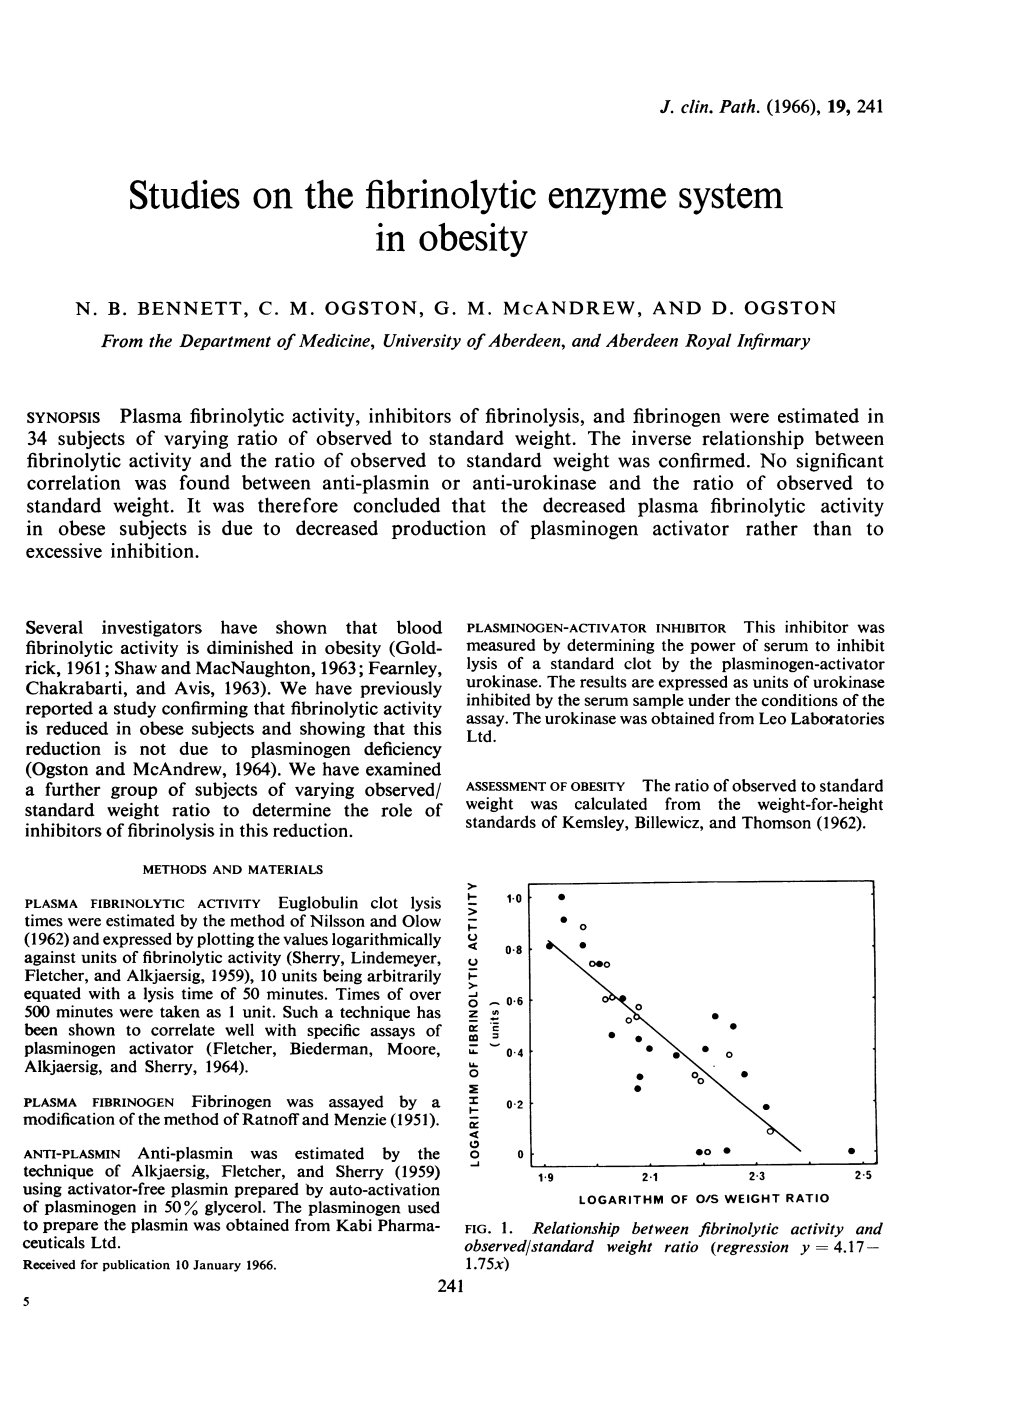 Studies on the Fibrinolytic Enzyme System in Obesity